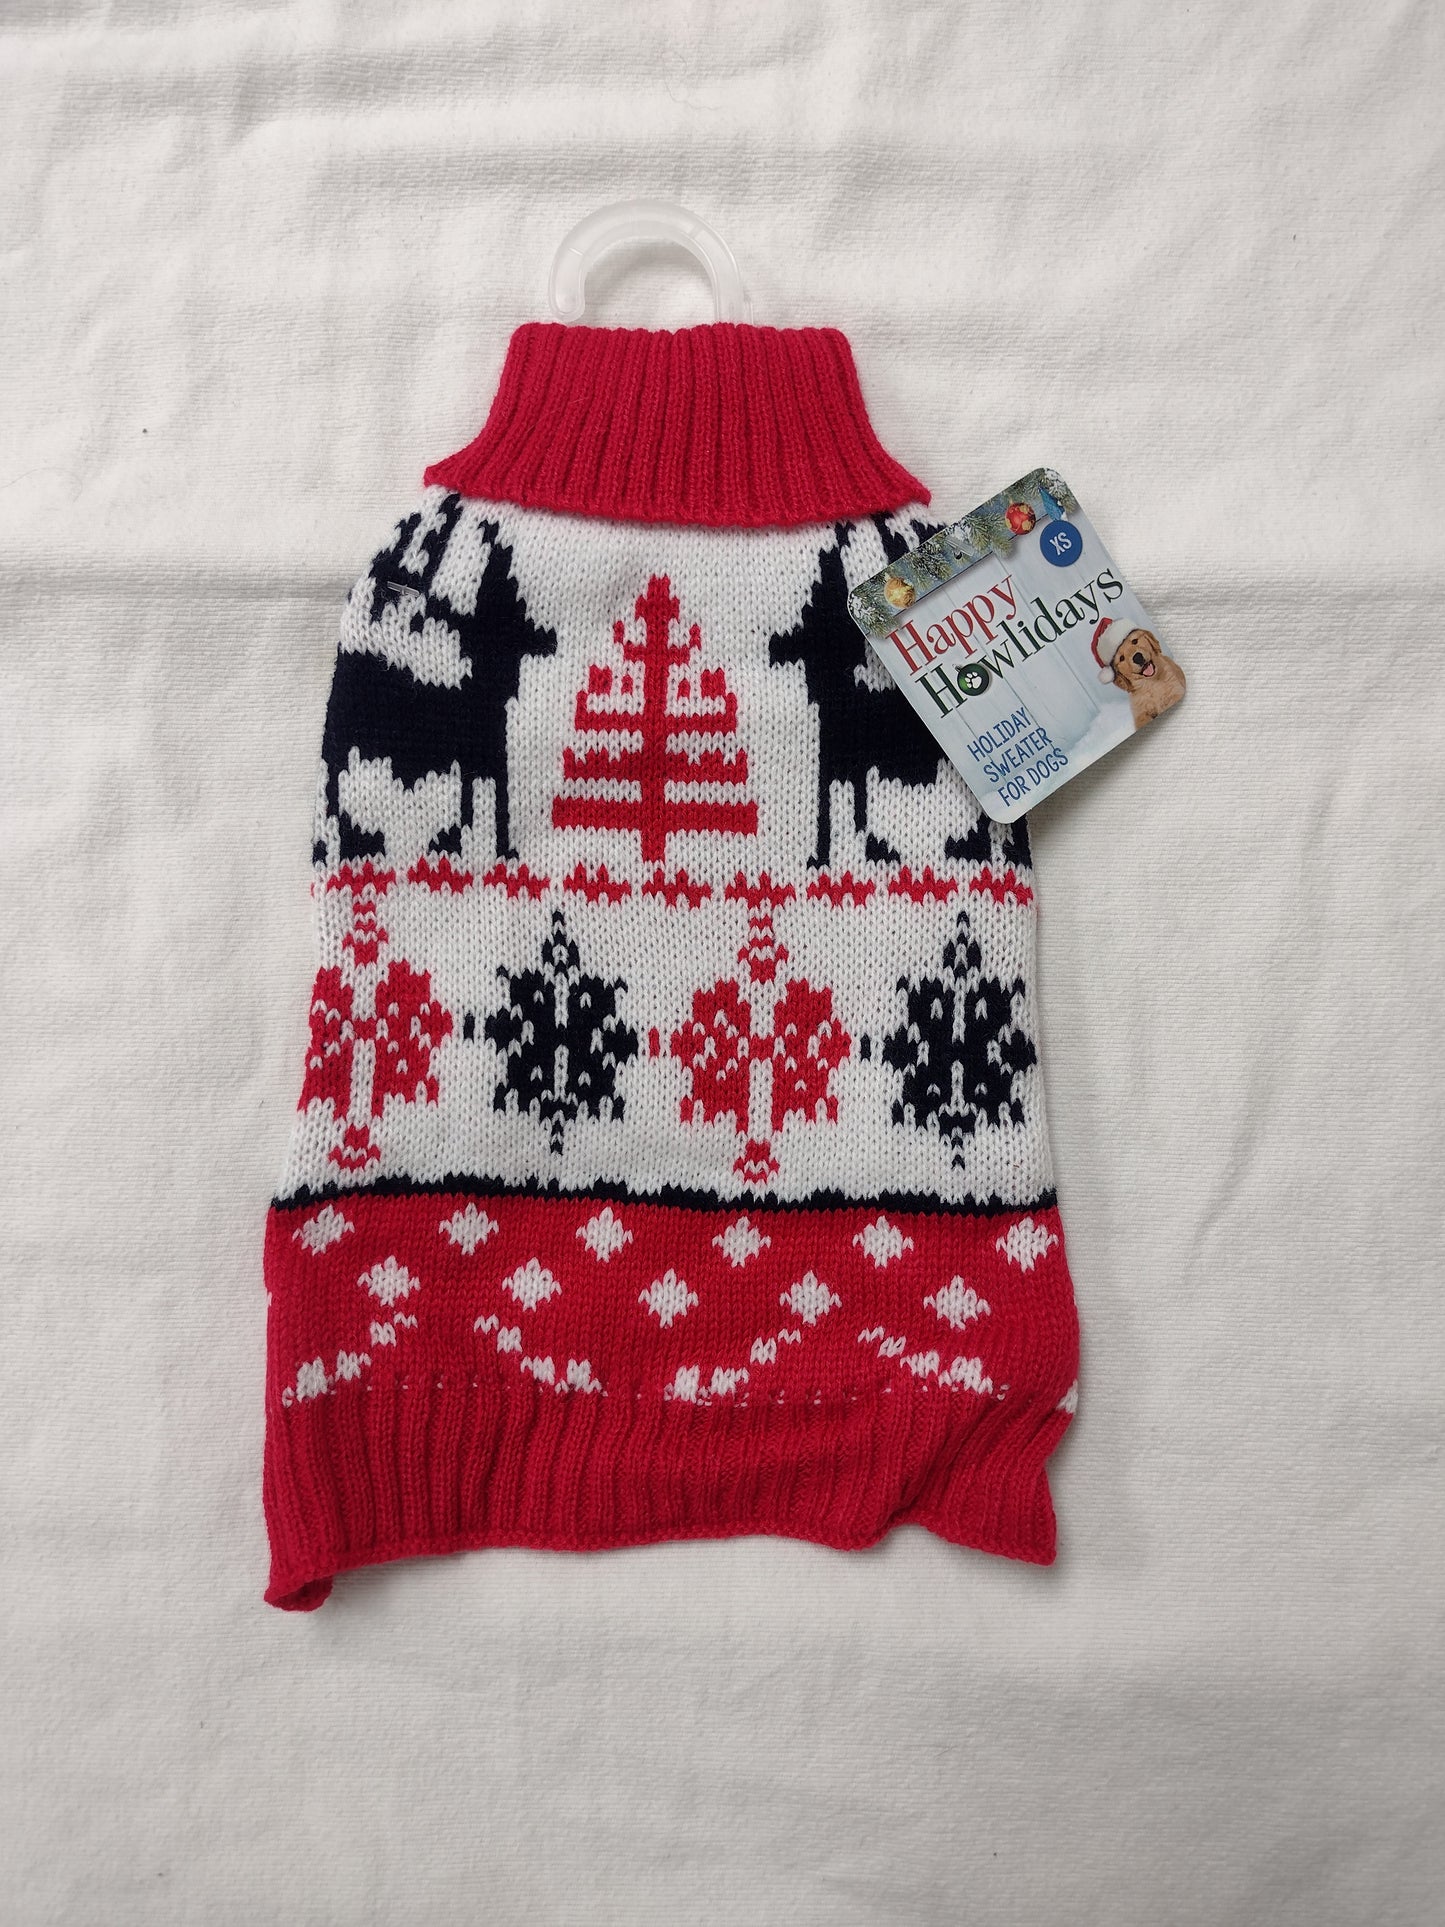 PET FACTORY HOLIDAY SWEATER